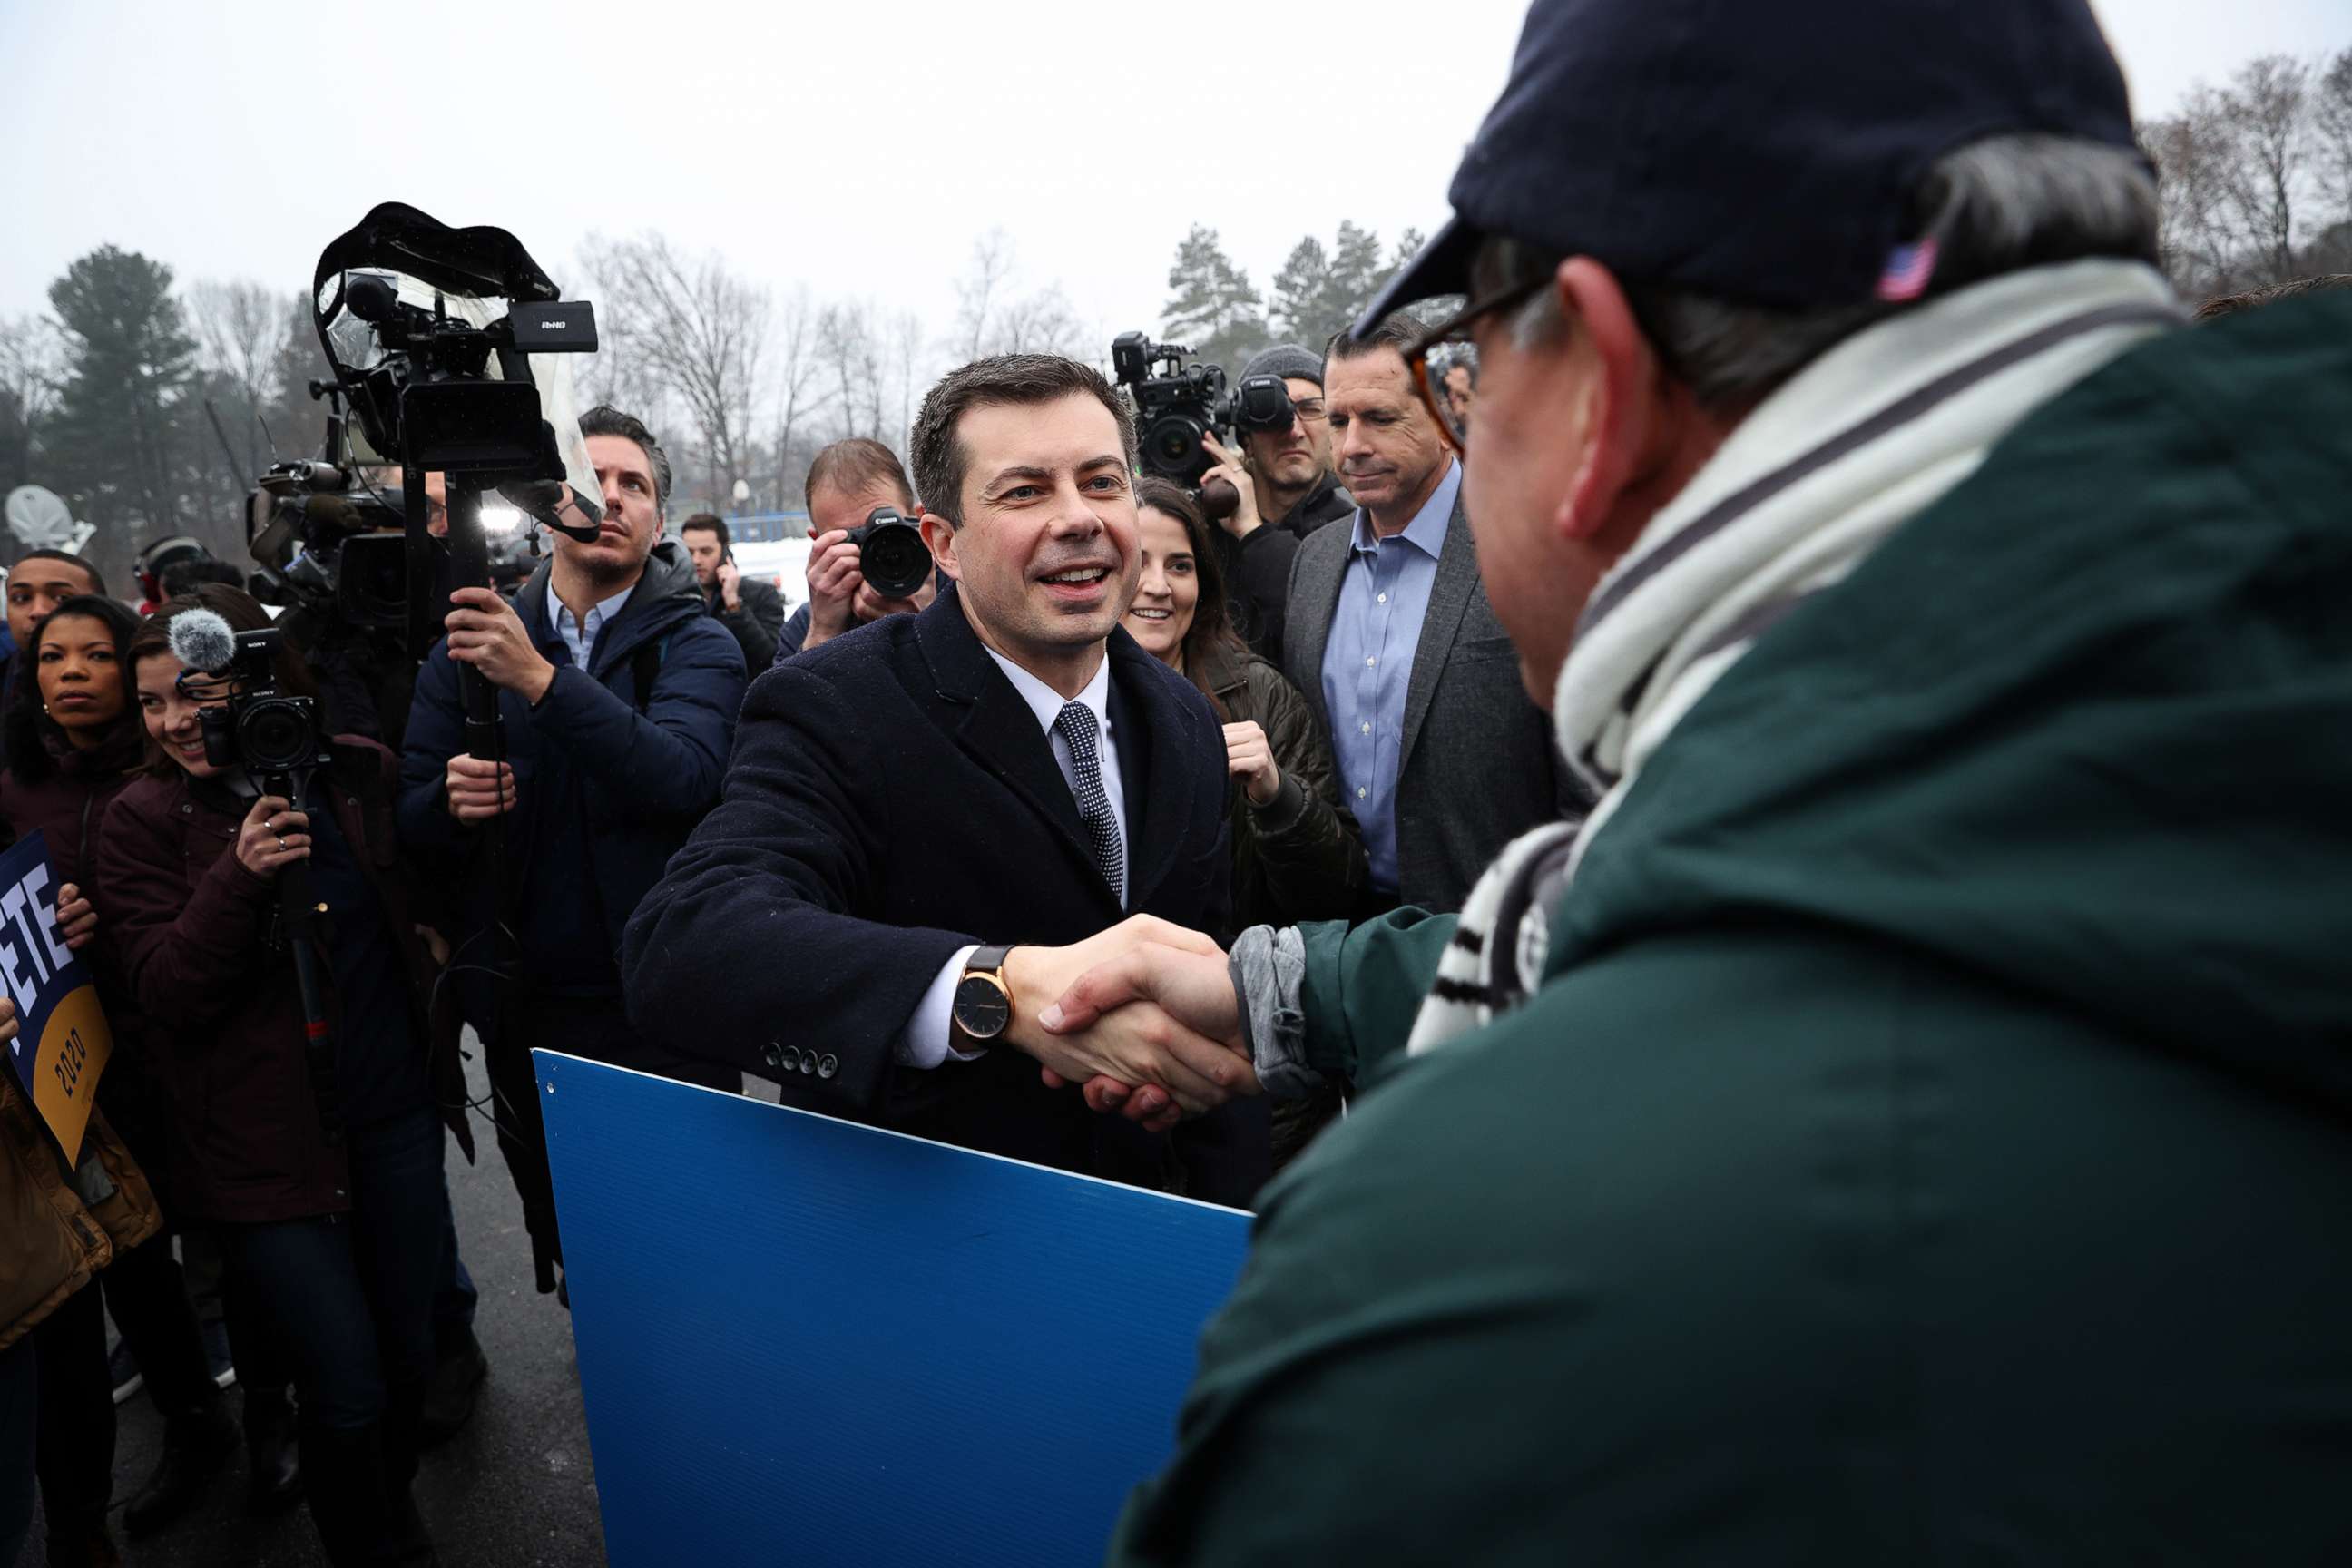 PHOTO: Democratic presidential candidate former South Bend Mayor Pete Buttigieg greets supporters outside a polling station at Broad Street Elementary School, Feb. 11, 2020 in Nashua, N.H.